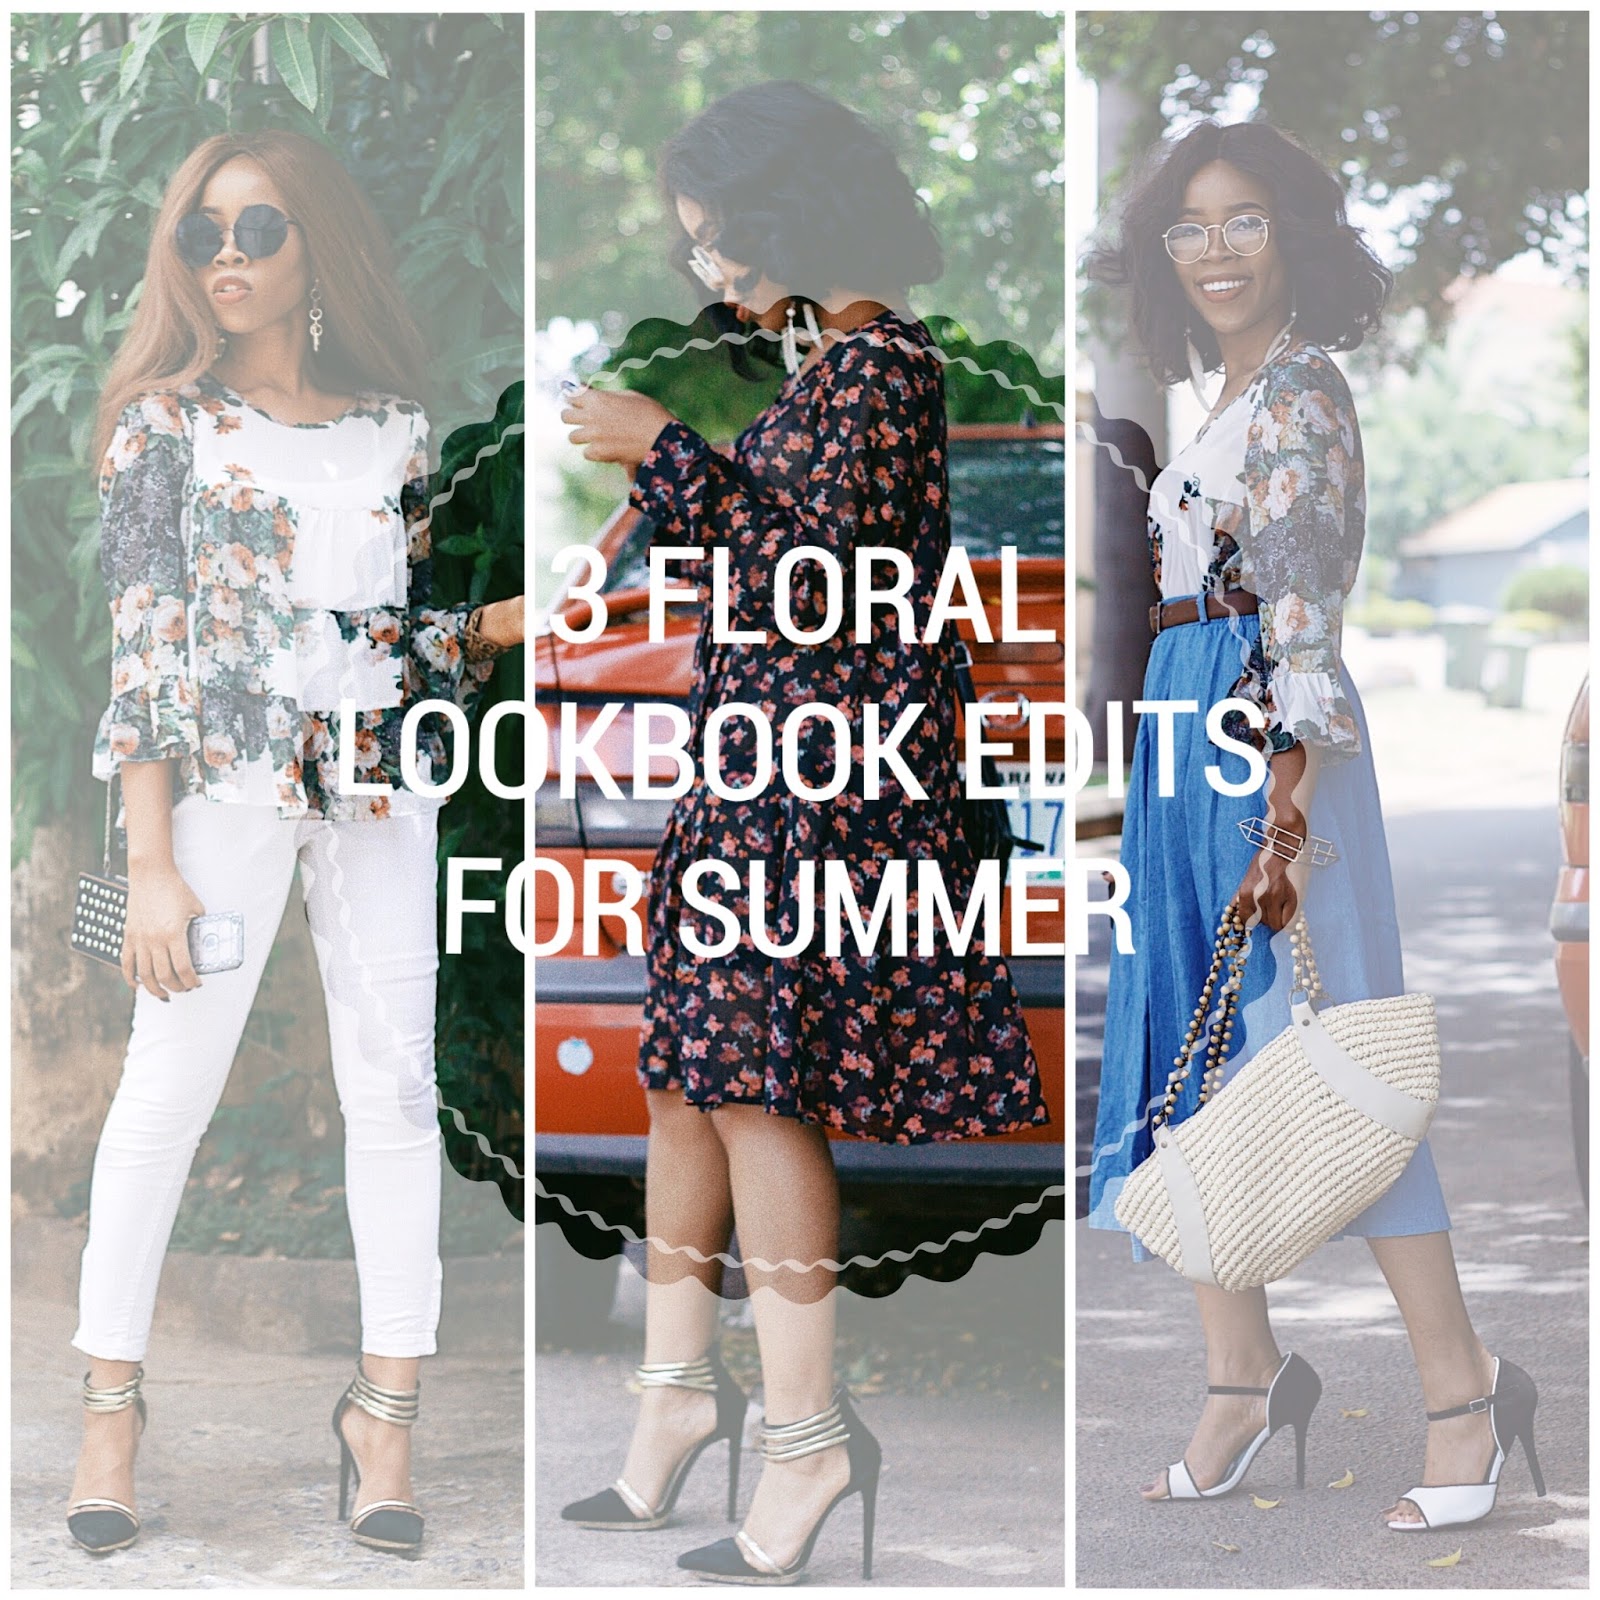 3 FLORAL LOOKBOOK EDITS FOR SUMMER